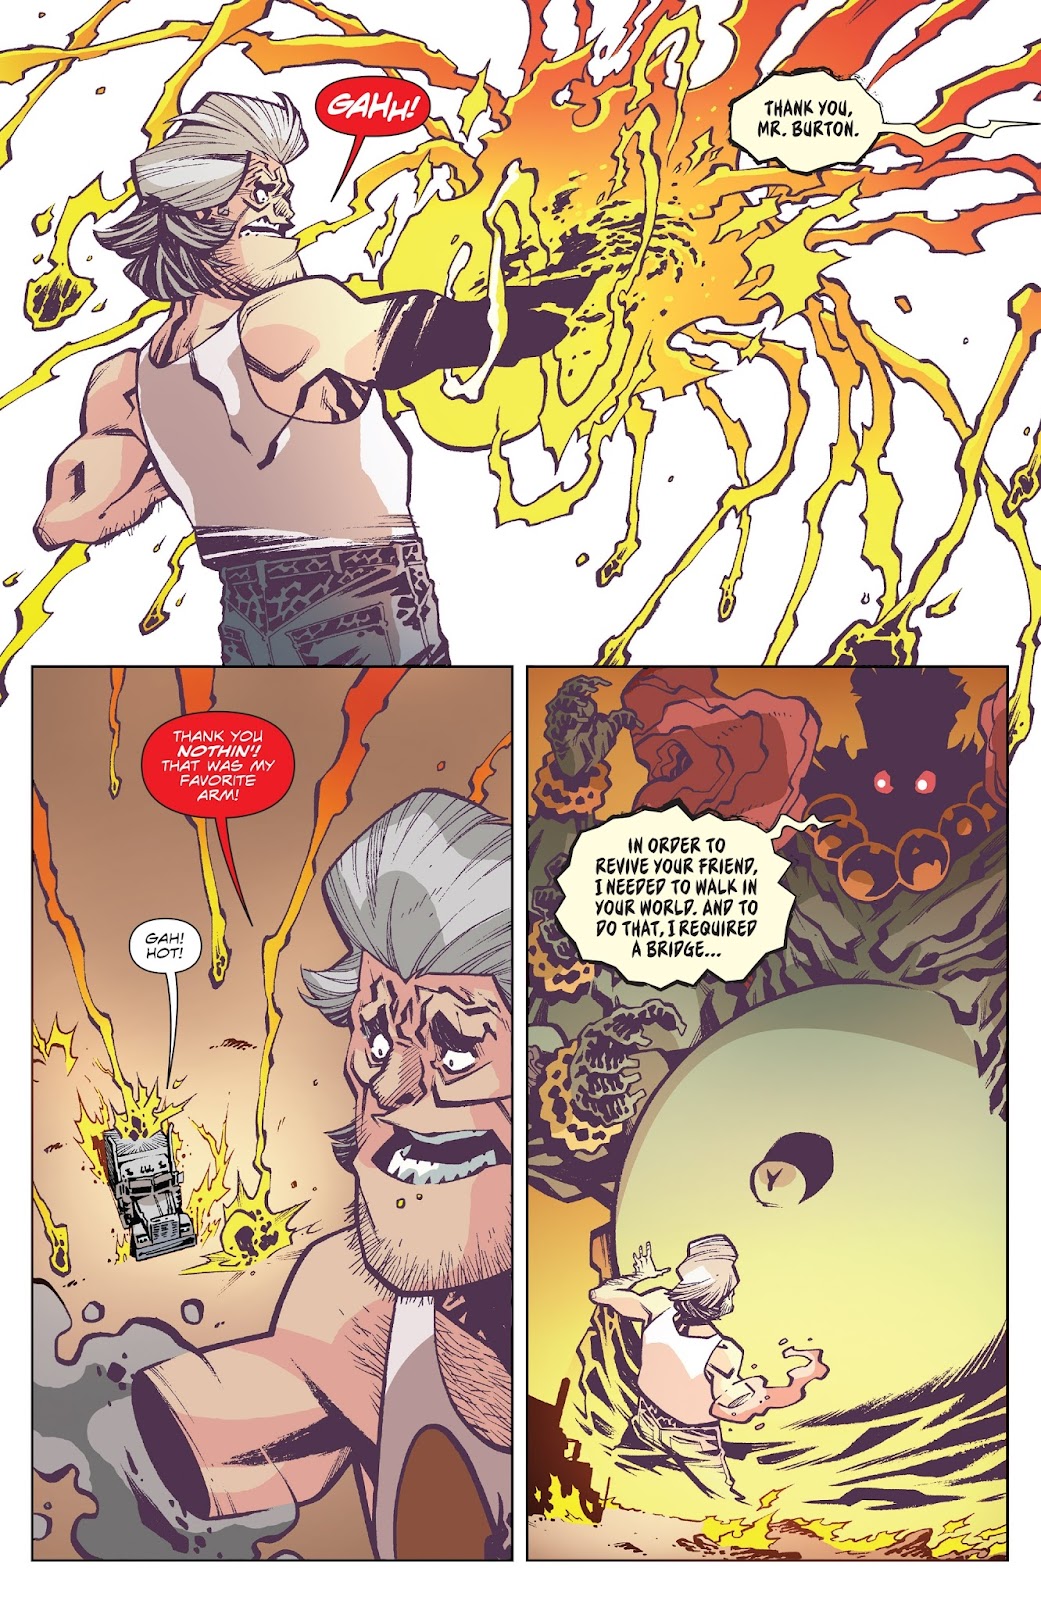 Big Trouble in Little China: Old Man Jack issue 3 - Page 19